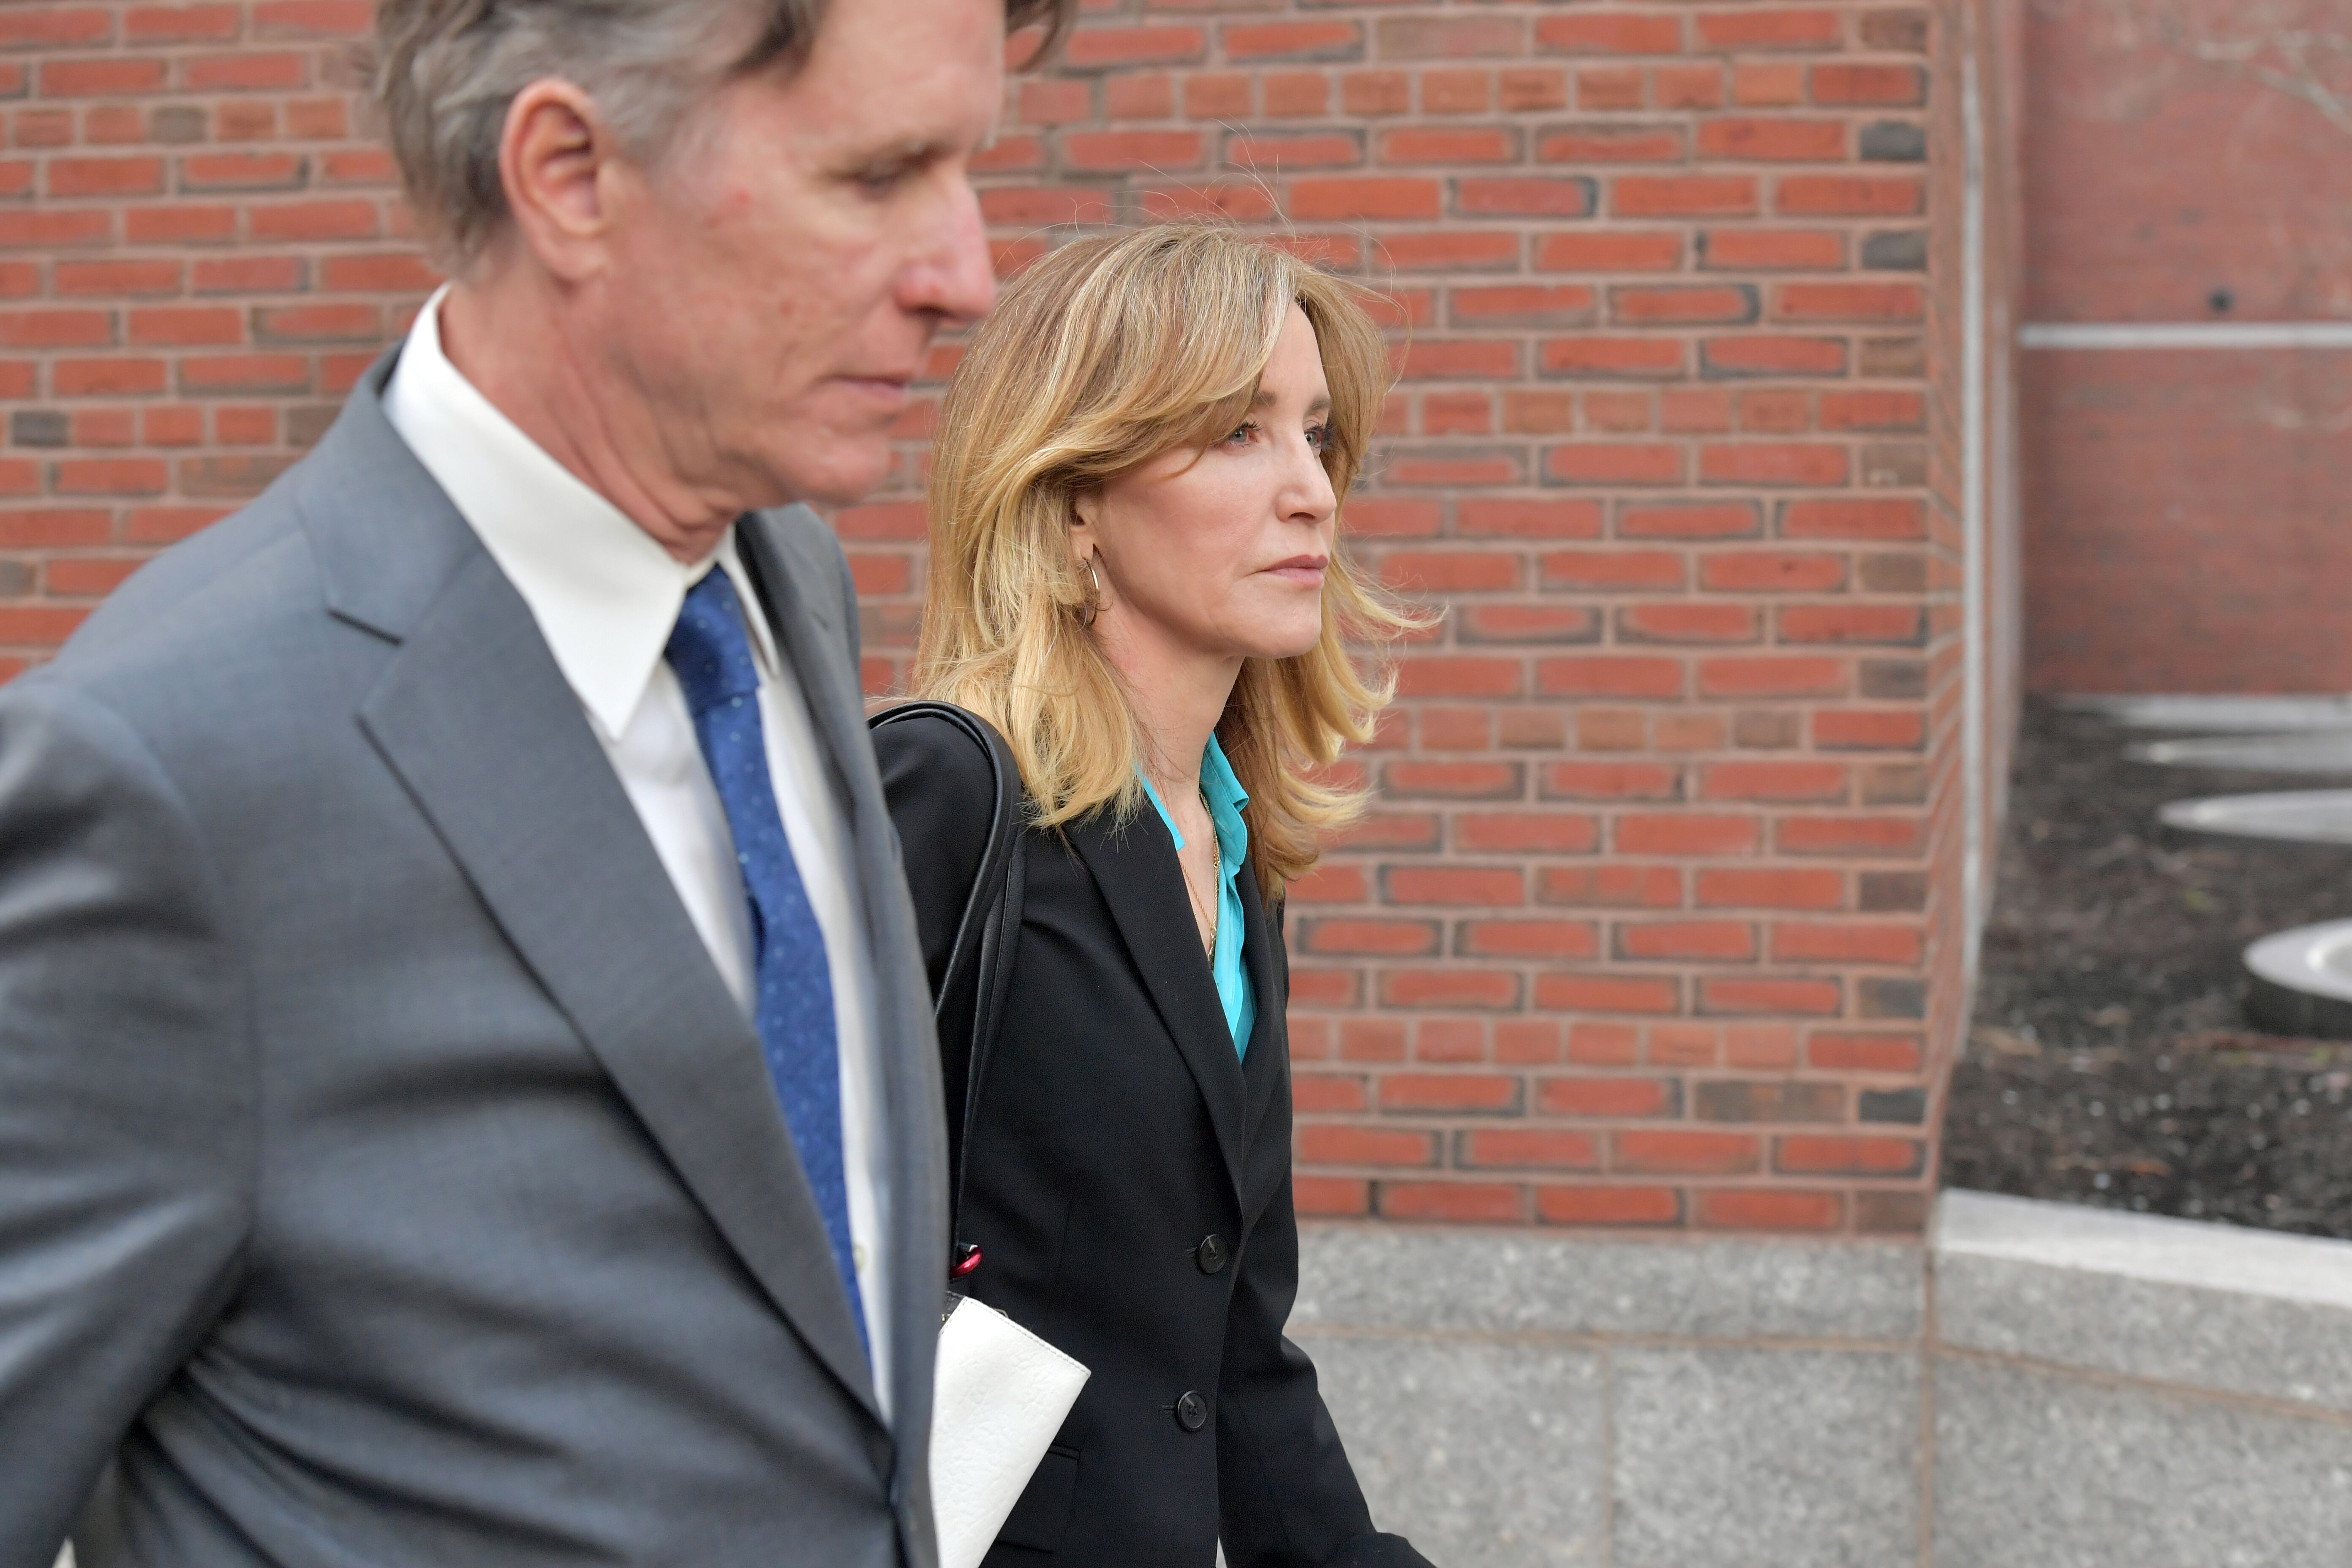 Felicity Huffman at a U.S. Courthouse on April 3, 2019, in Boston, Massachusetts | Photo: Paul Marotta/Getty Images